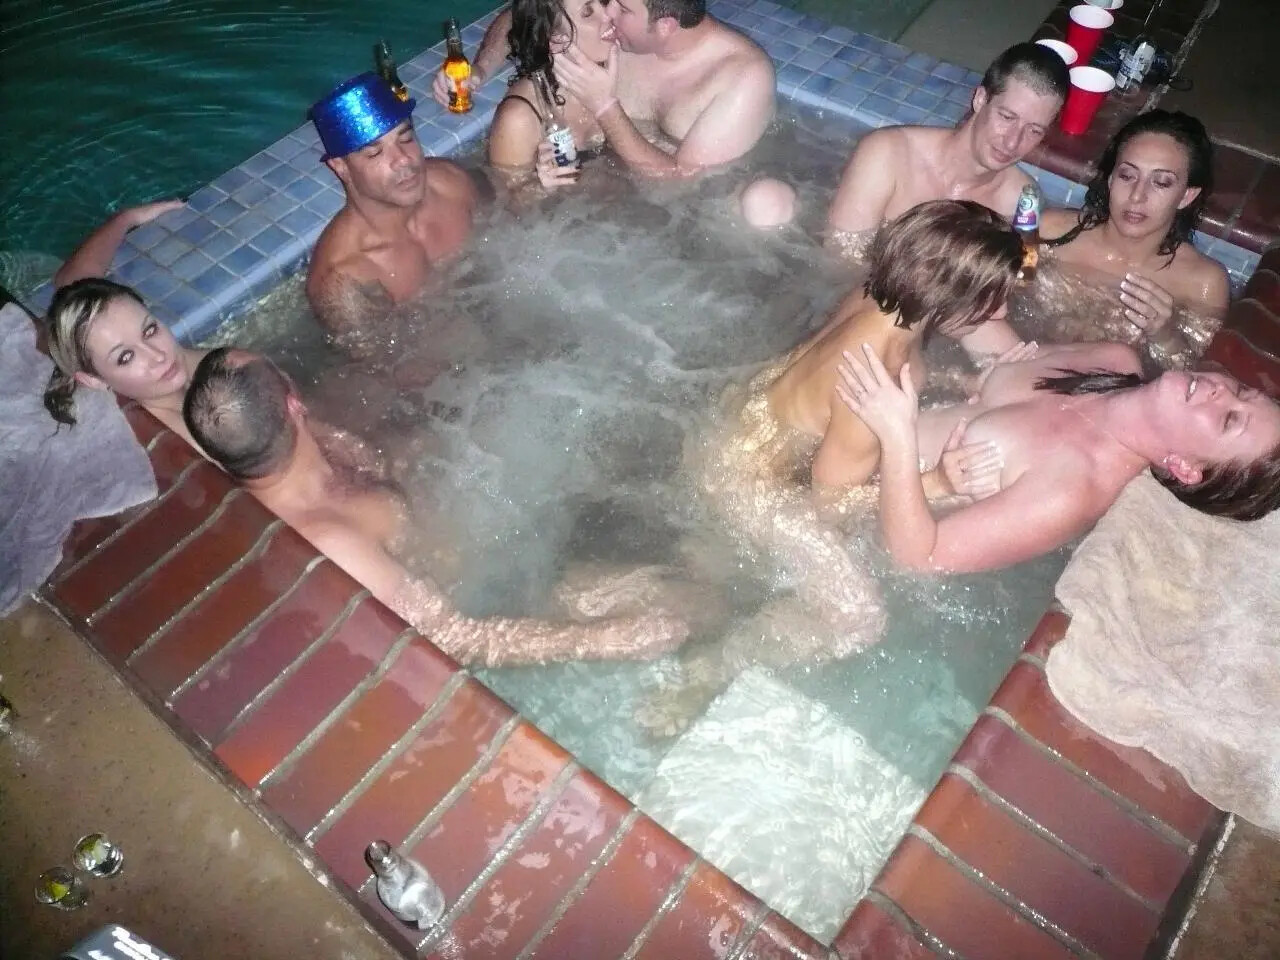 Our sex party? Ive got some pics! - 02-amateur-swinger-pics-from-the-hot- tub Porn